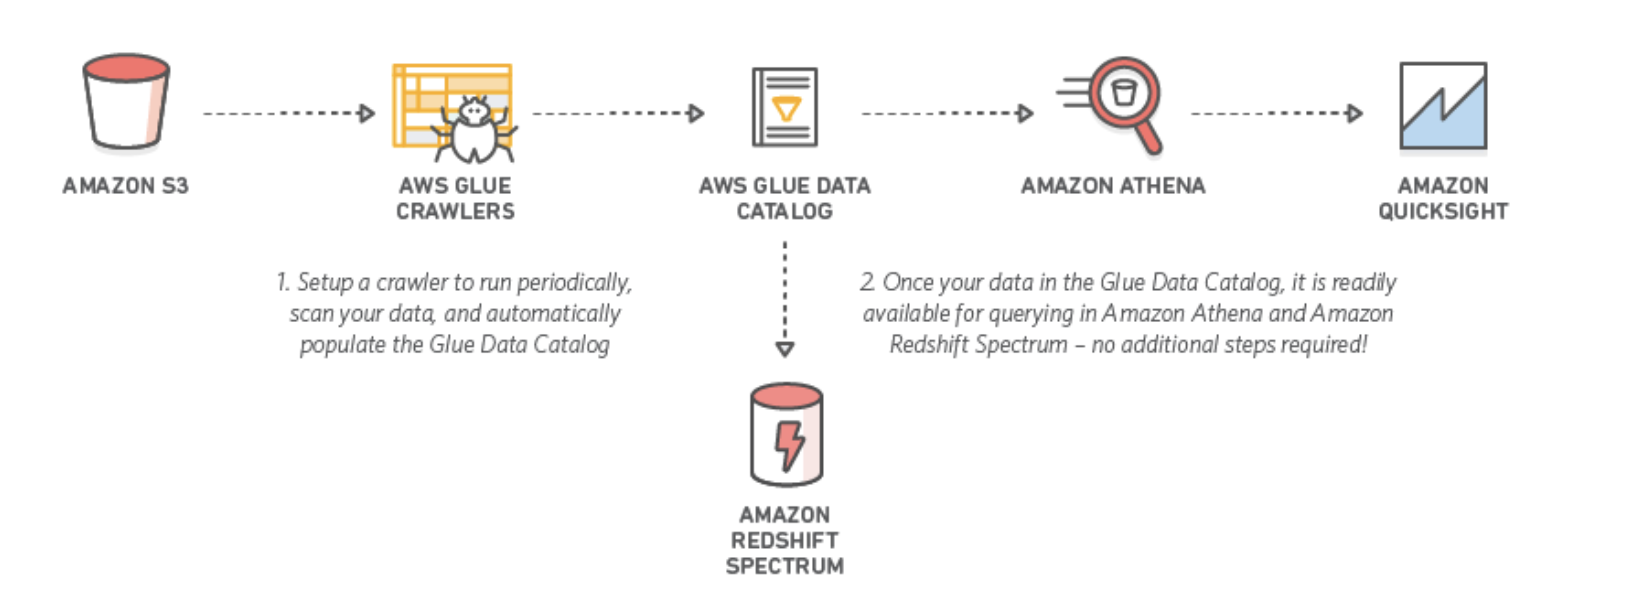 AMAZON S3 AWS GLUE AWS GLUE DATA AMAZON ATHENA AMAZON
CRAWLERS CATALOG QUICKSIGHT

1. Setup a crawler to run periodically,
scan your data and automatically
populate the Glue Data Catalog

2 Once your data in the Glue Data Catalog, it is readily
available for querying in Amazon Athena and Amazon
Redshift Spectrum - no additional steps required!

d--------

AMAZON
REDSHIFT
SPECTRUM